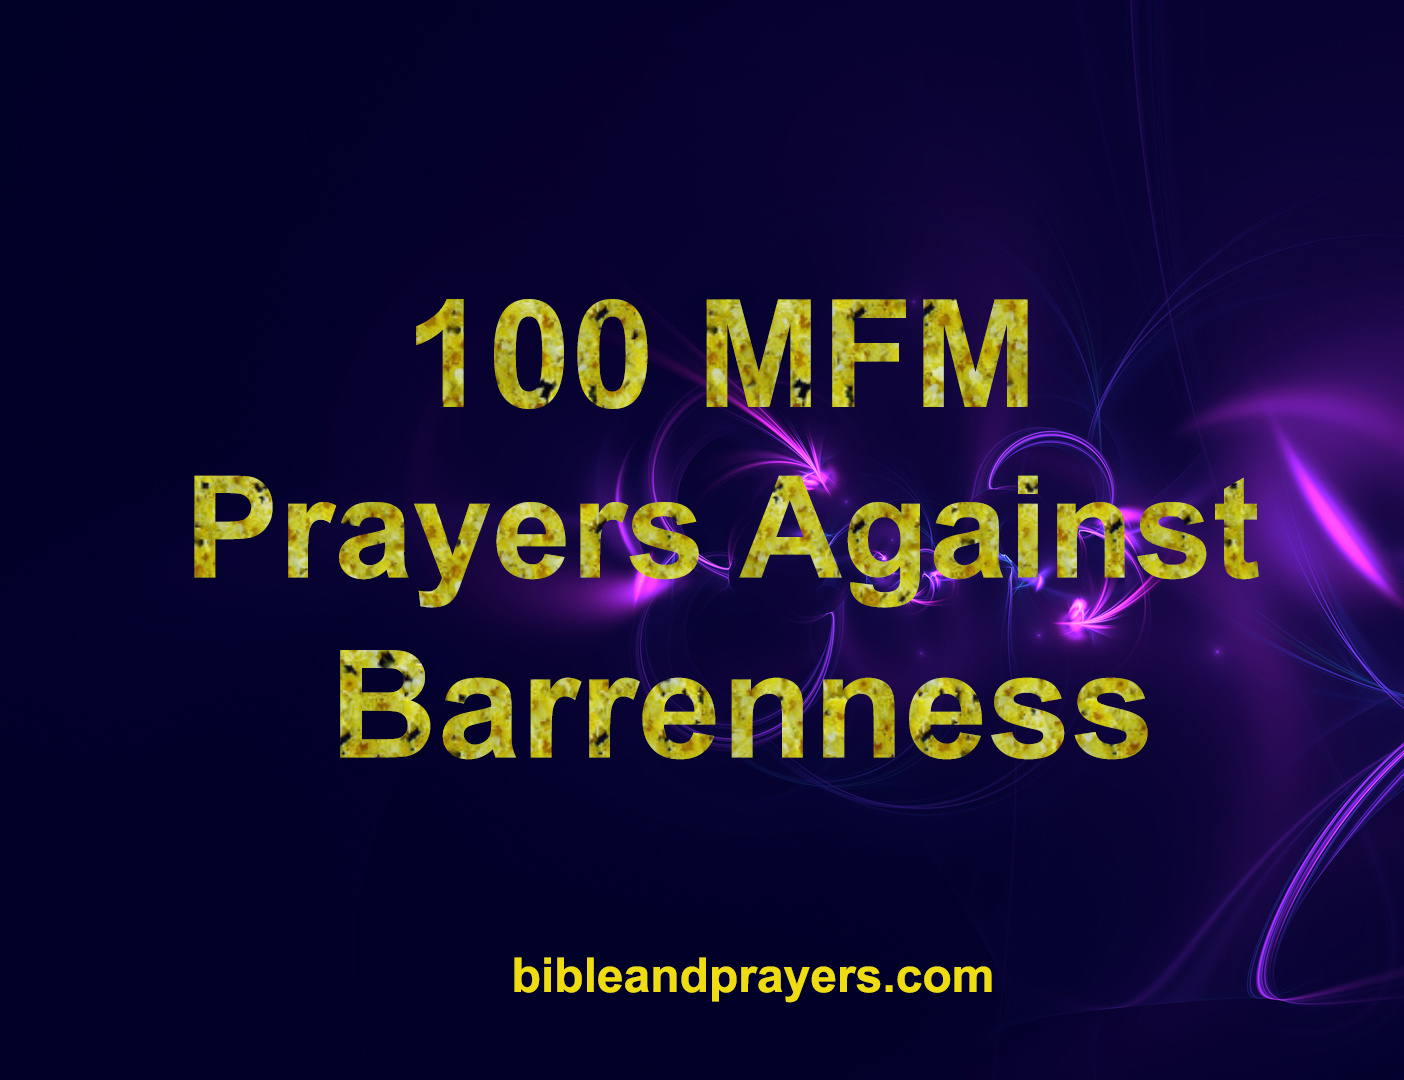 mfm prayer against barrenness and infertility